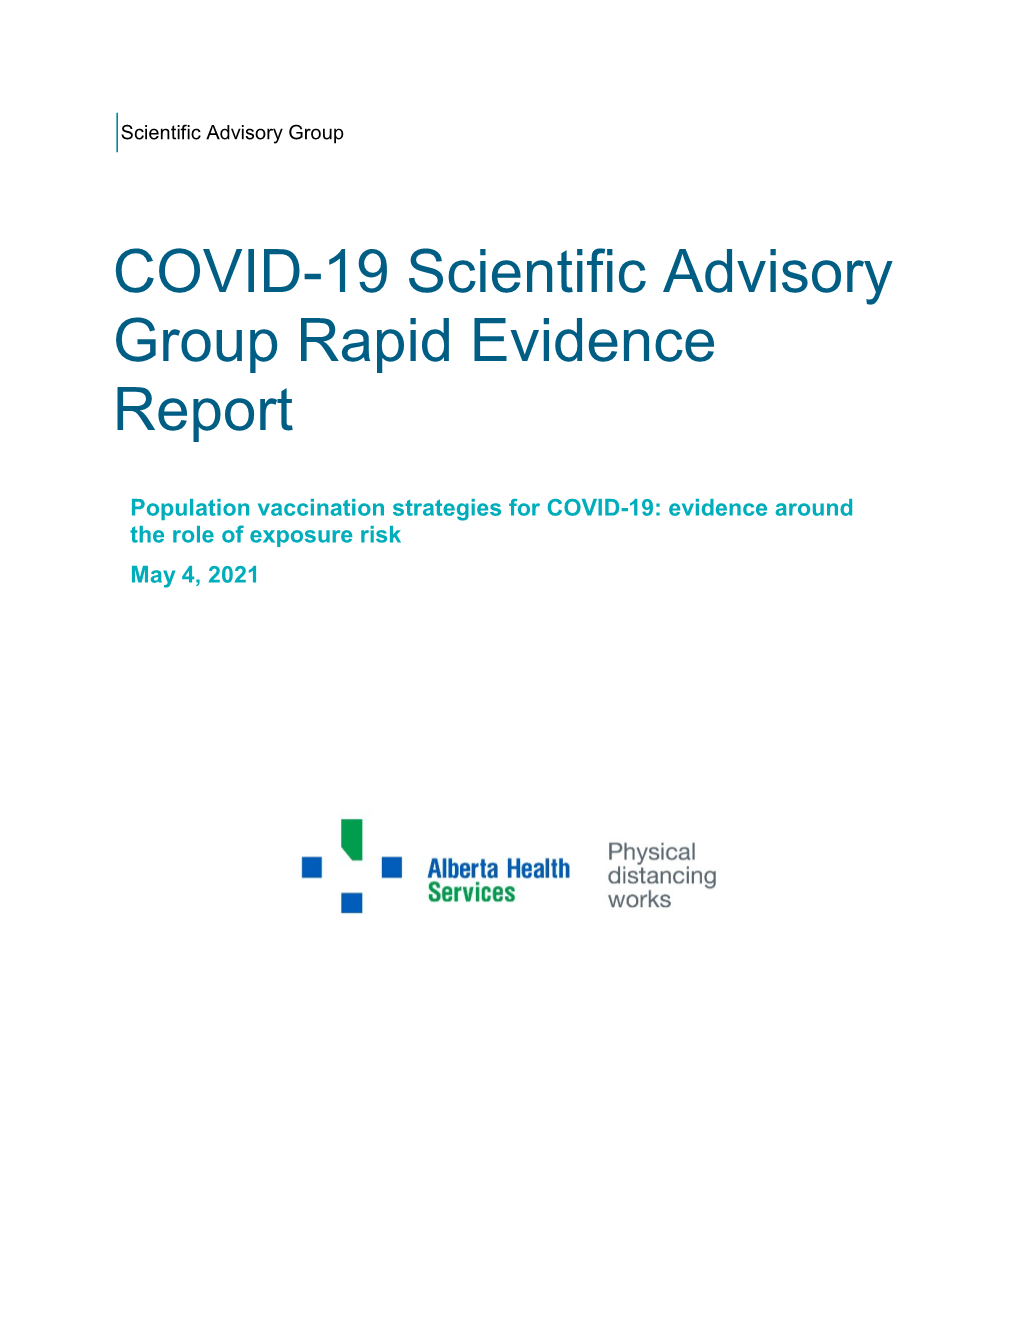 COVID-19 Vaccination Strategies Rapid Review